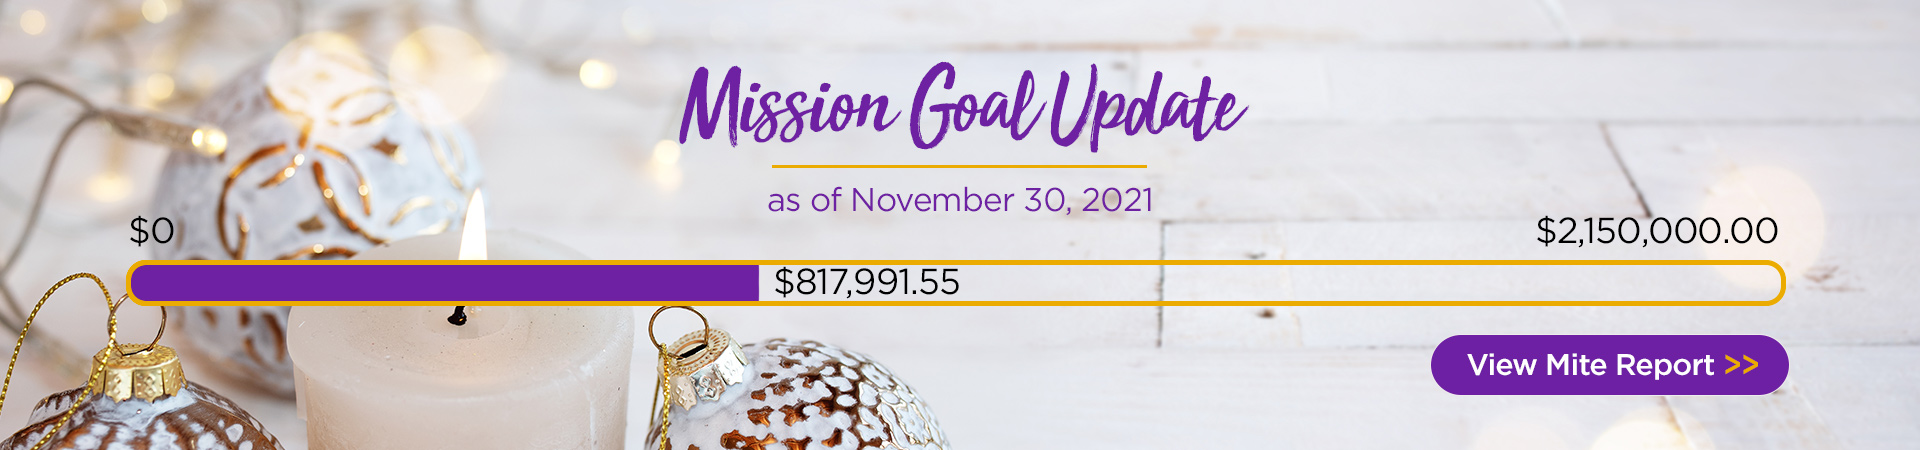 Mission Goal Update as of November 30, 2021. View Mite Report.